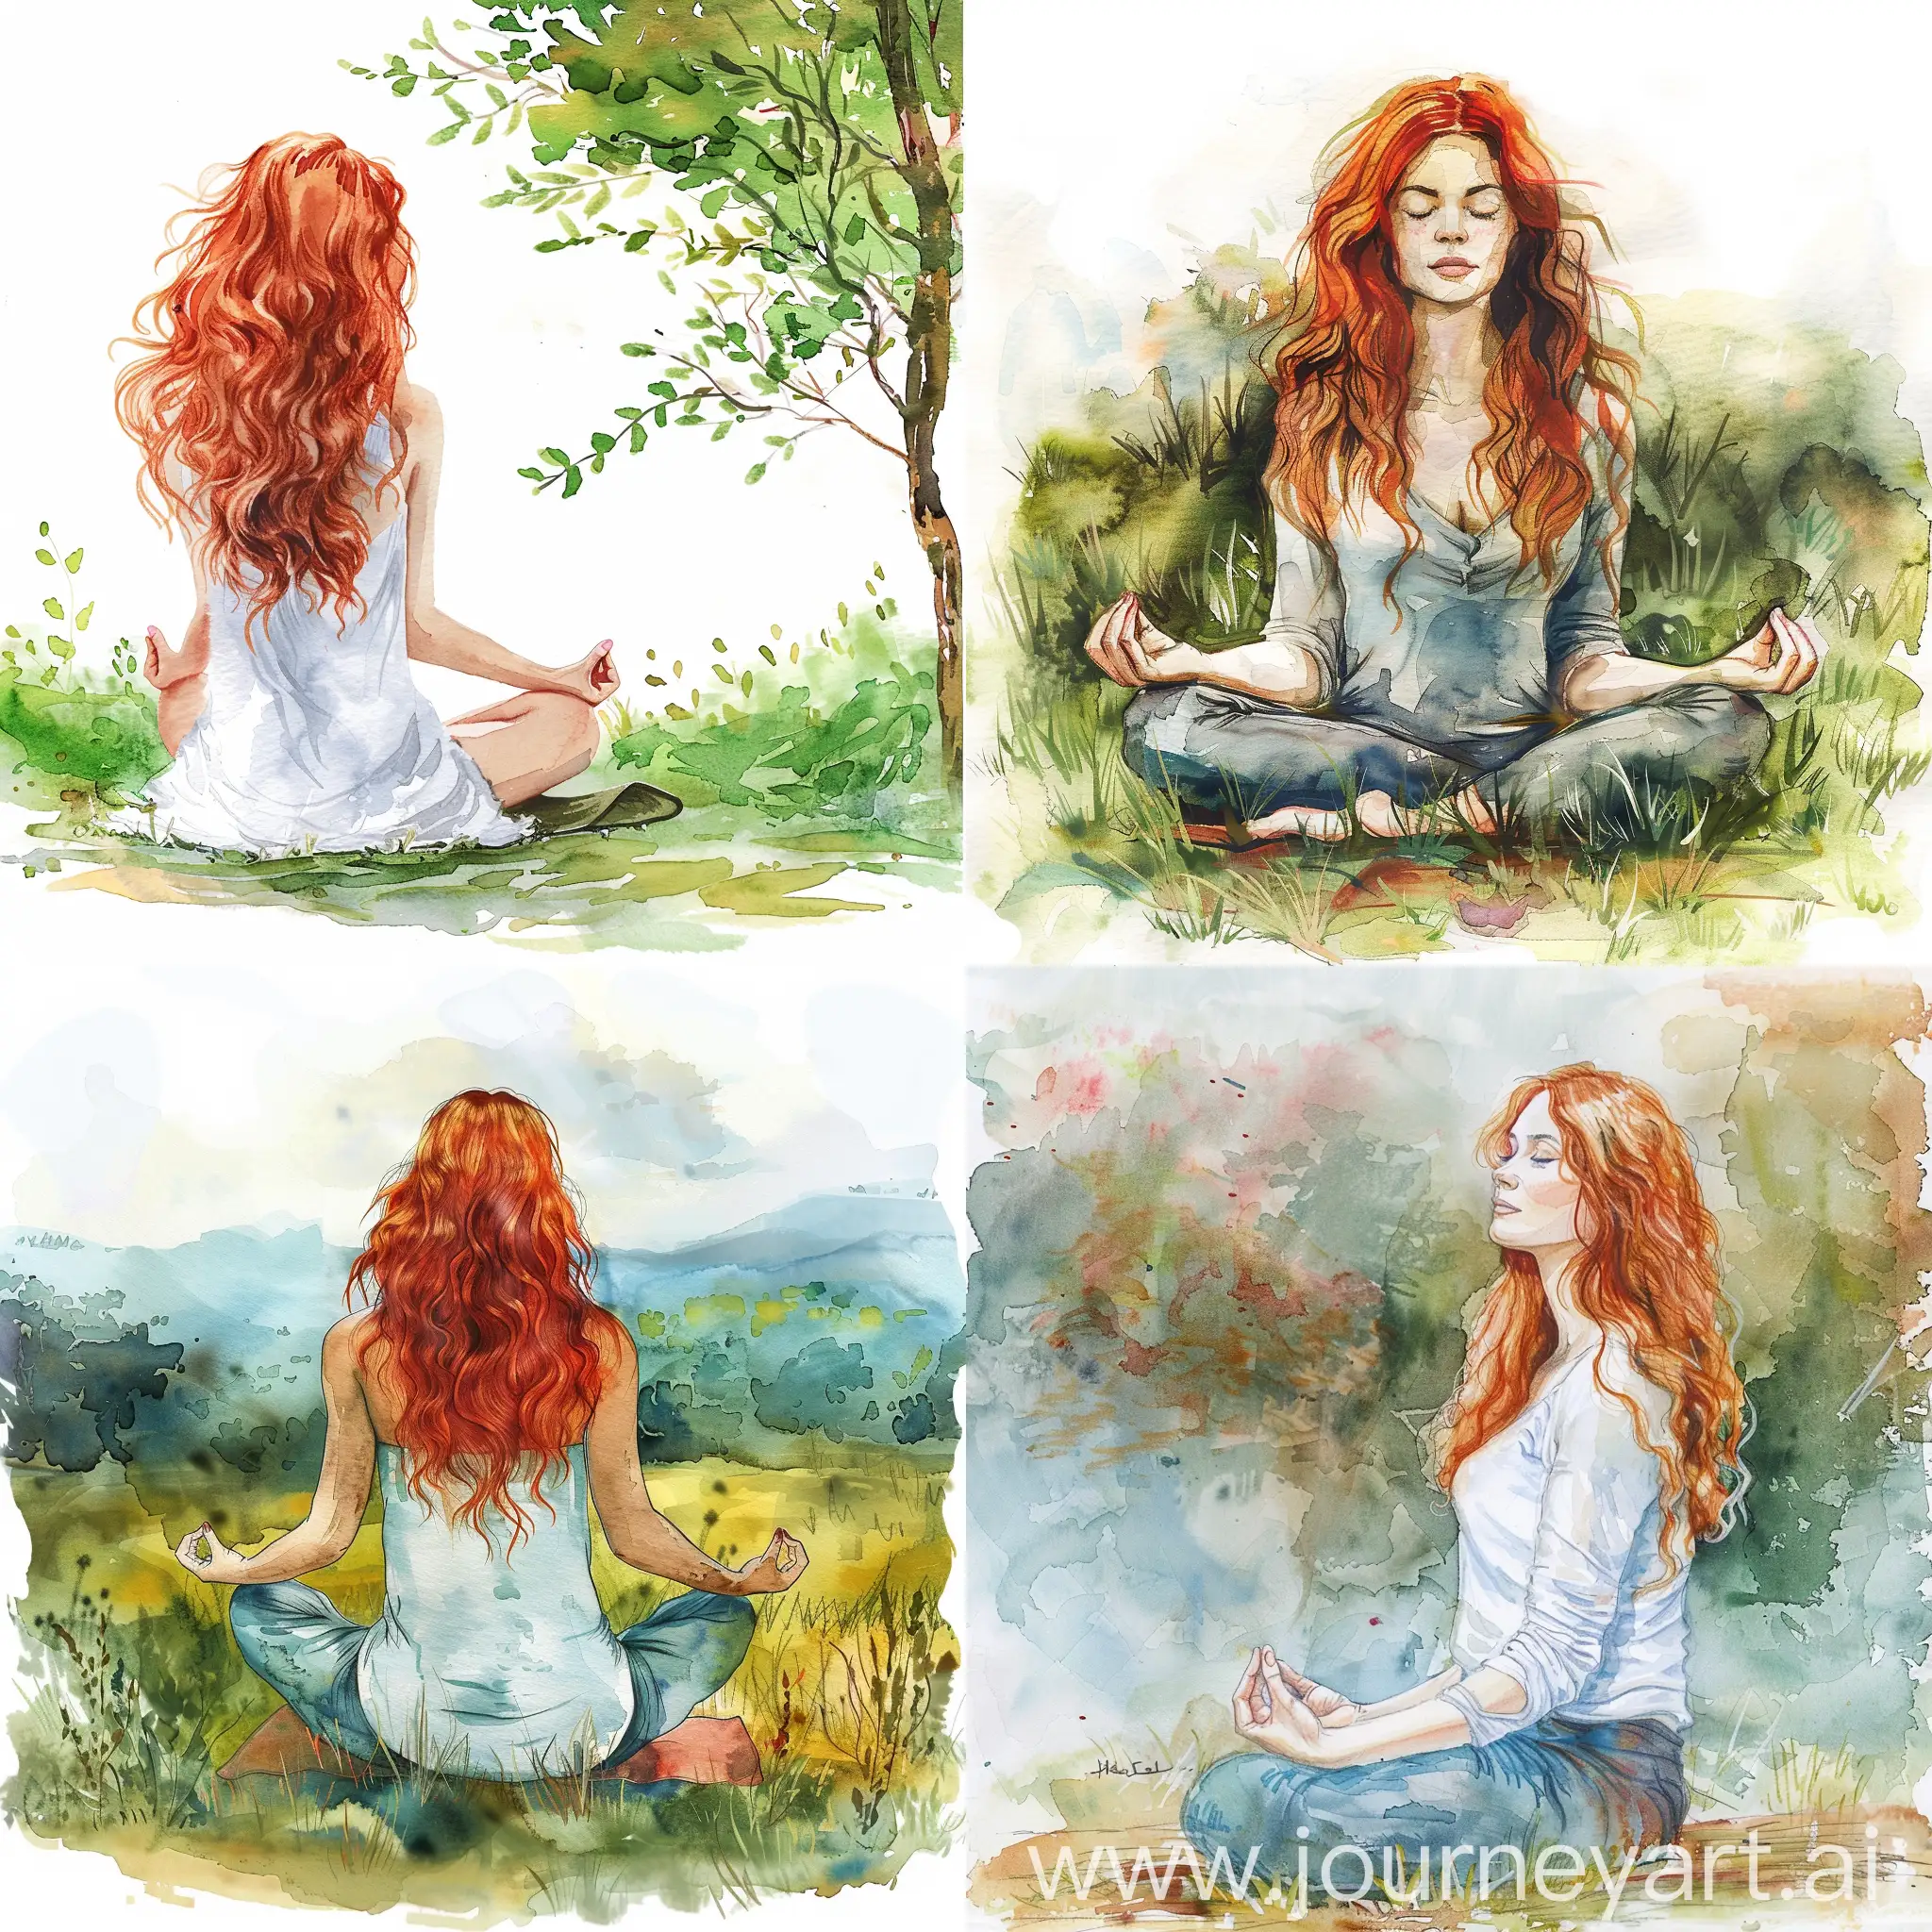 watercolor woman with wavy red hair is doing yoga in the nature